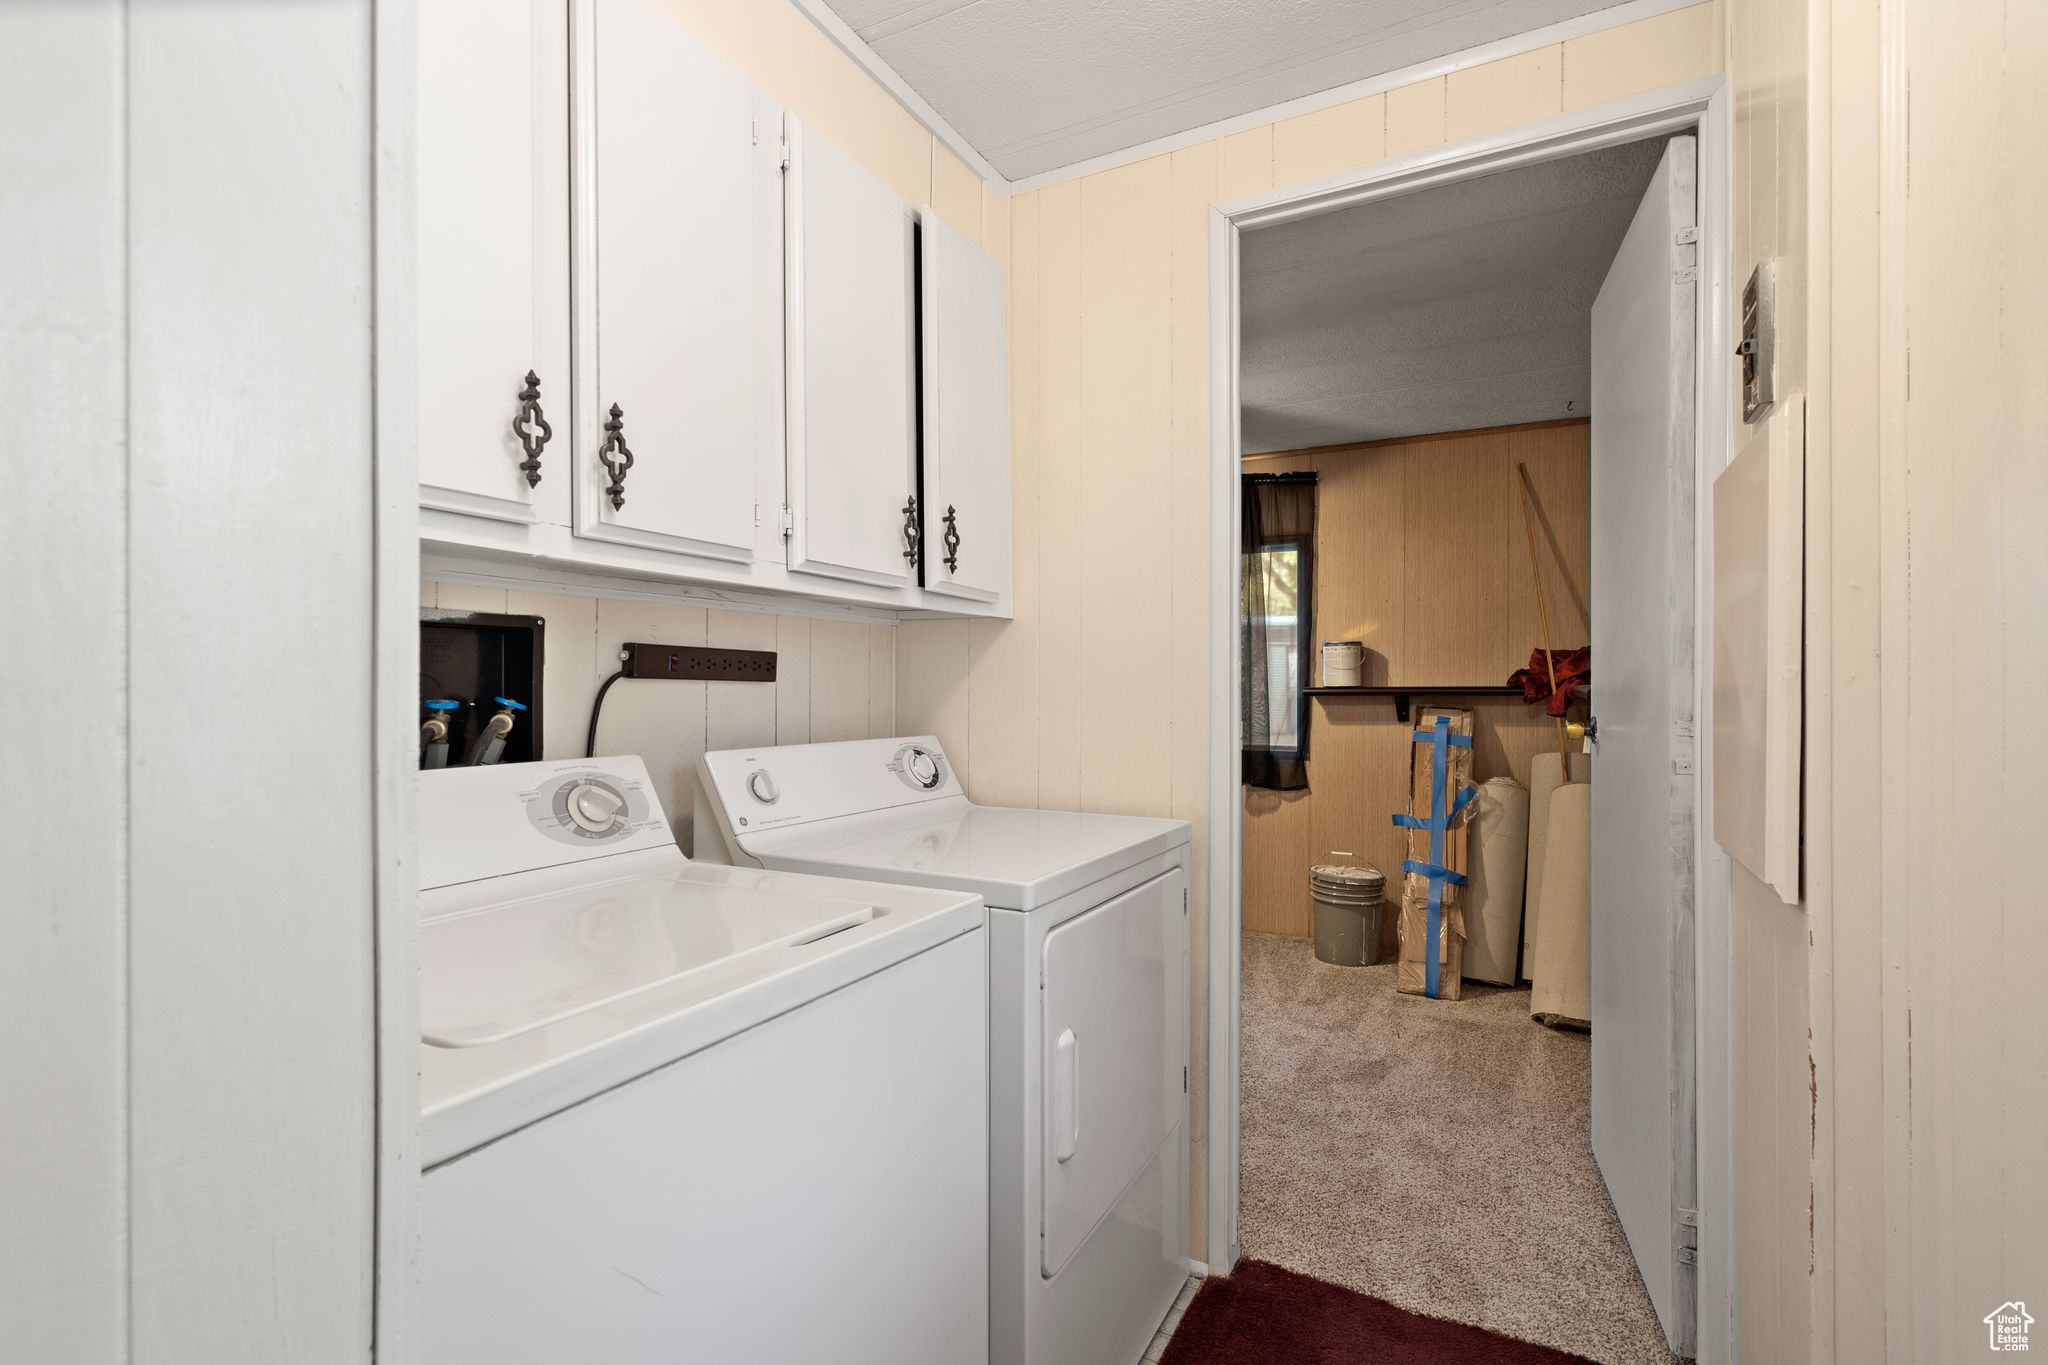 Laundry room featuring washer and dryer, hookup for a washing machine, cabinets, and light colored carpet